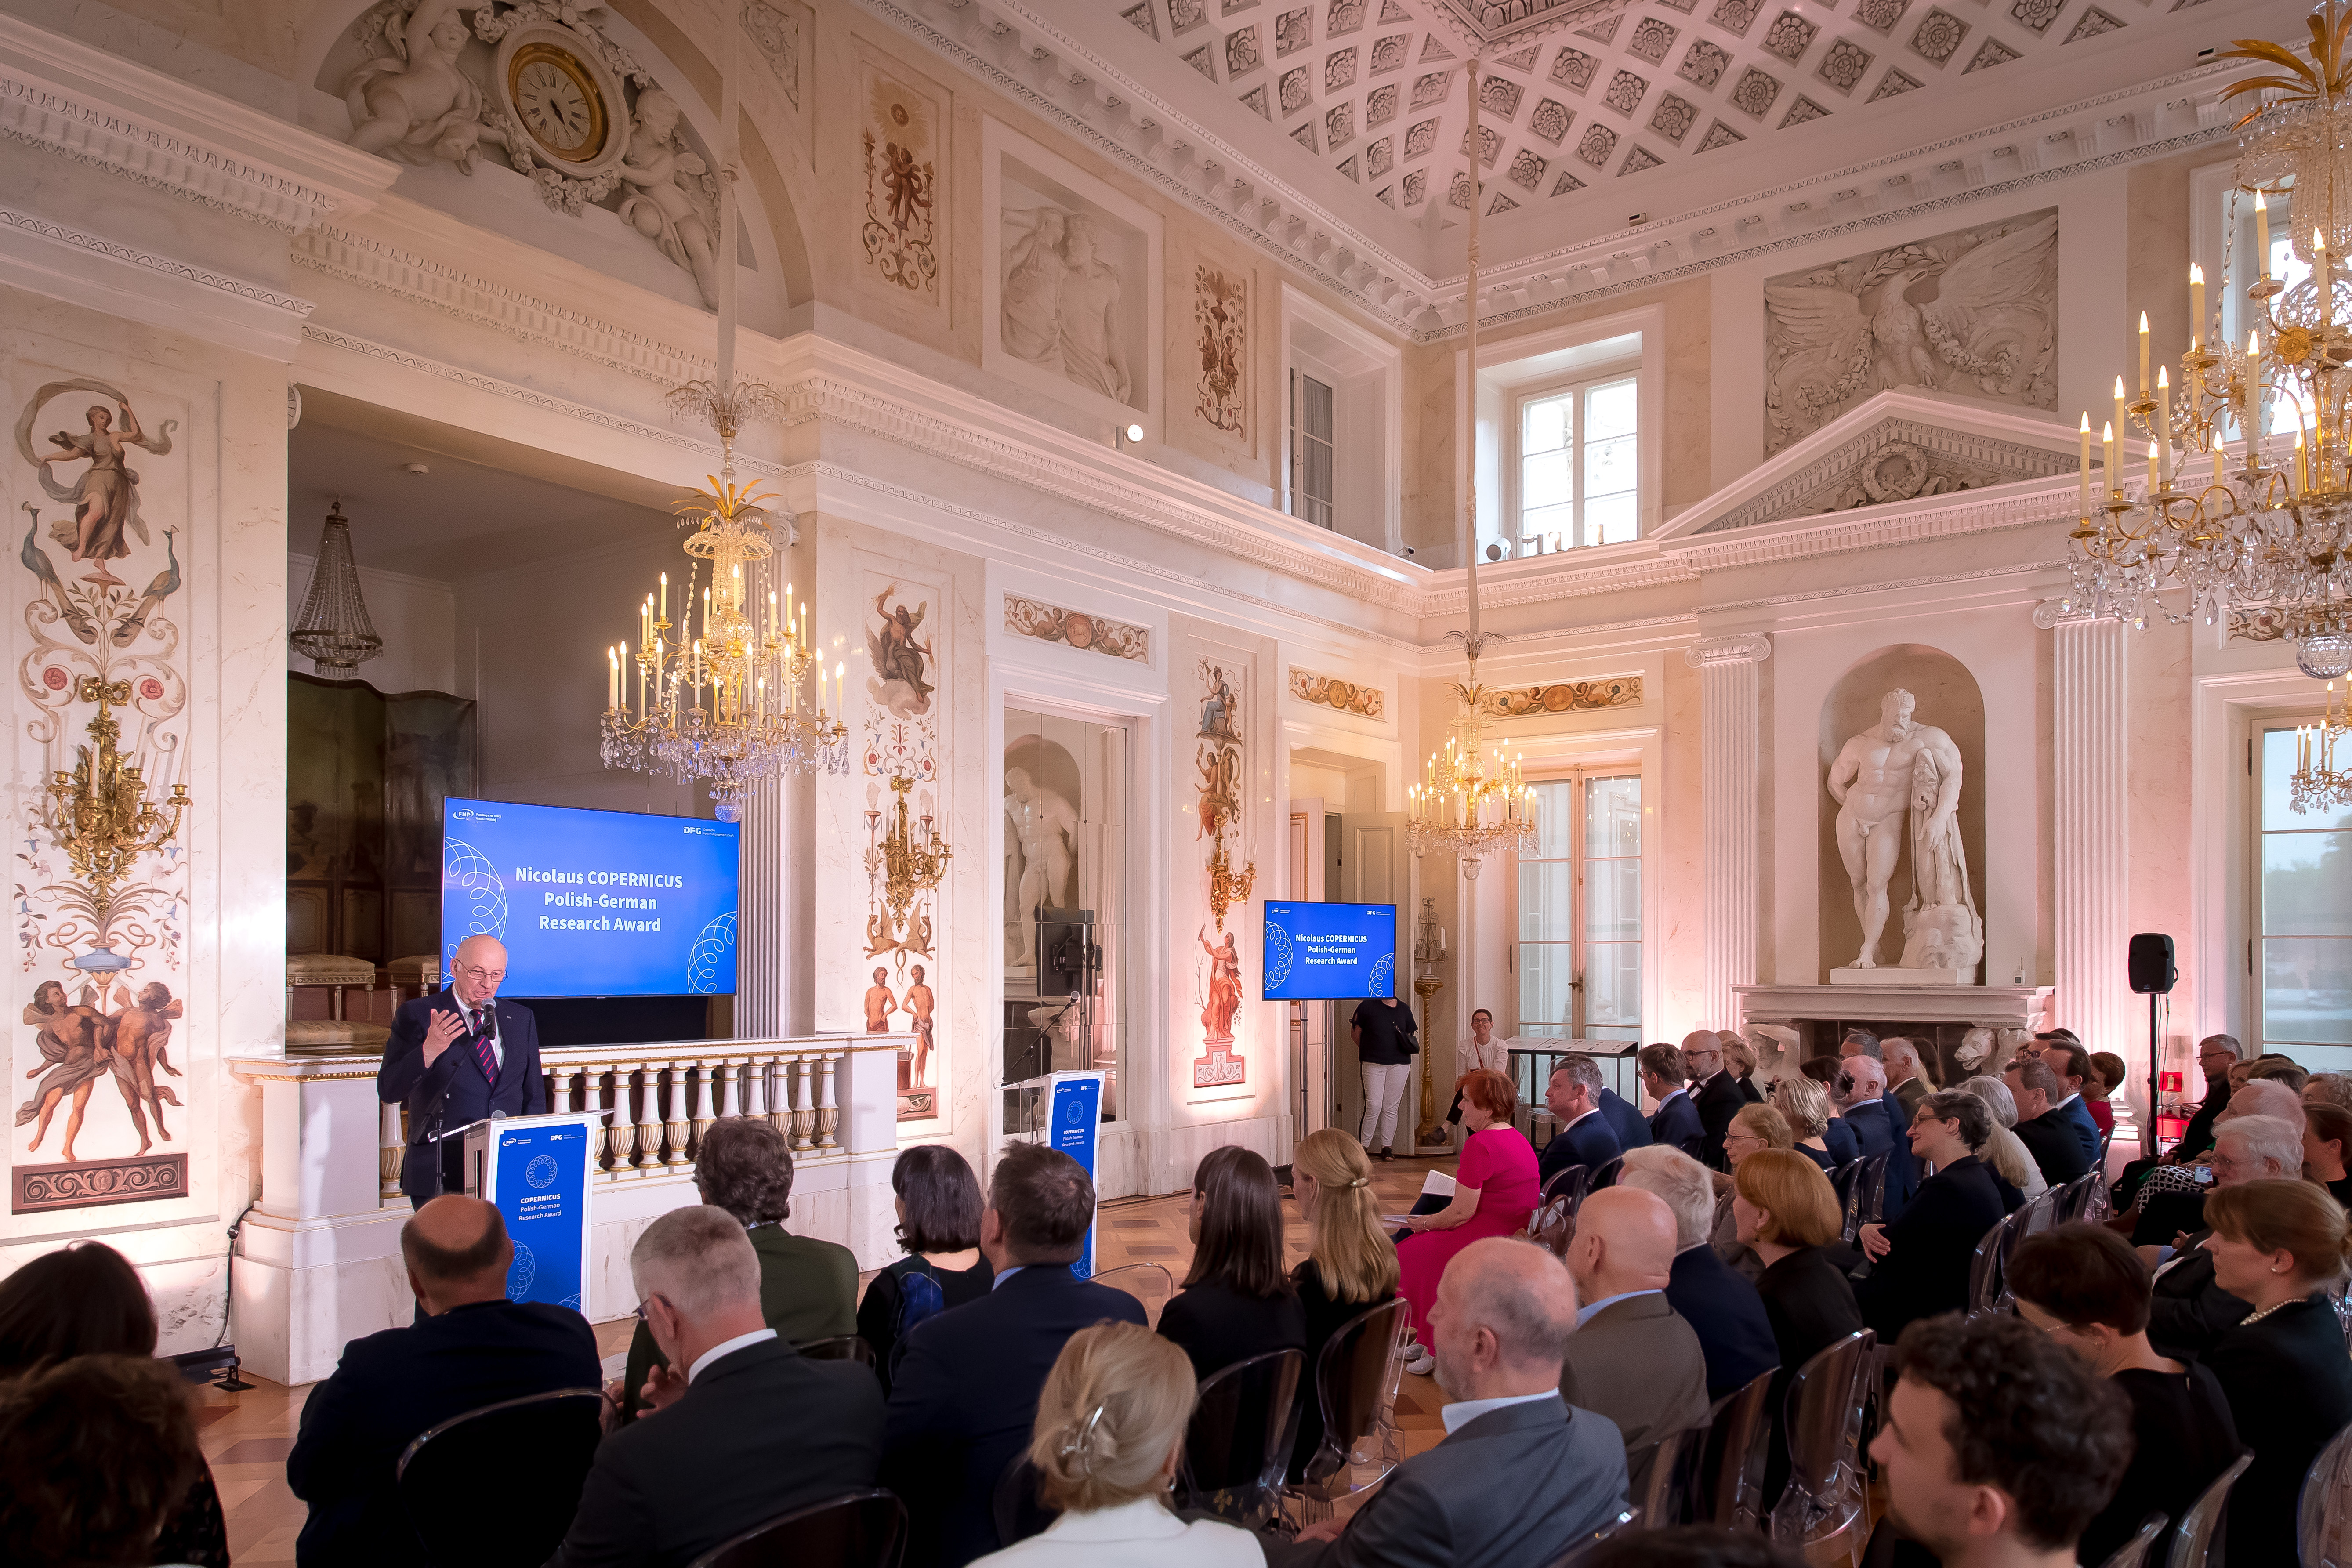 Welcoming words by FNP President Żylicz at Łazienki Palace in Warsaw